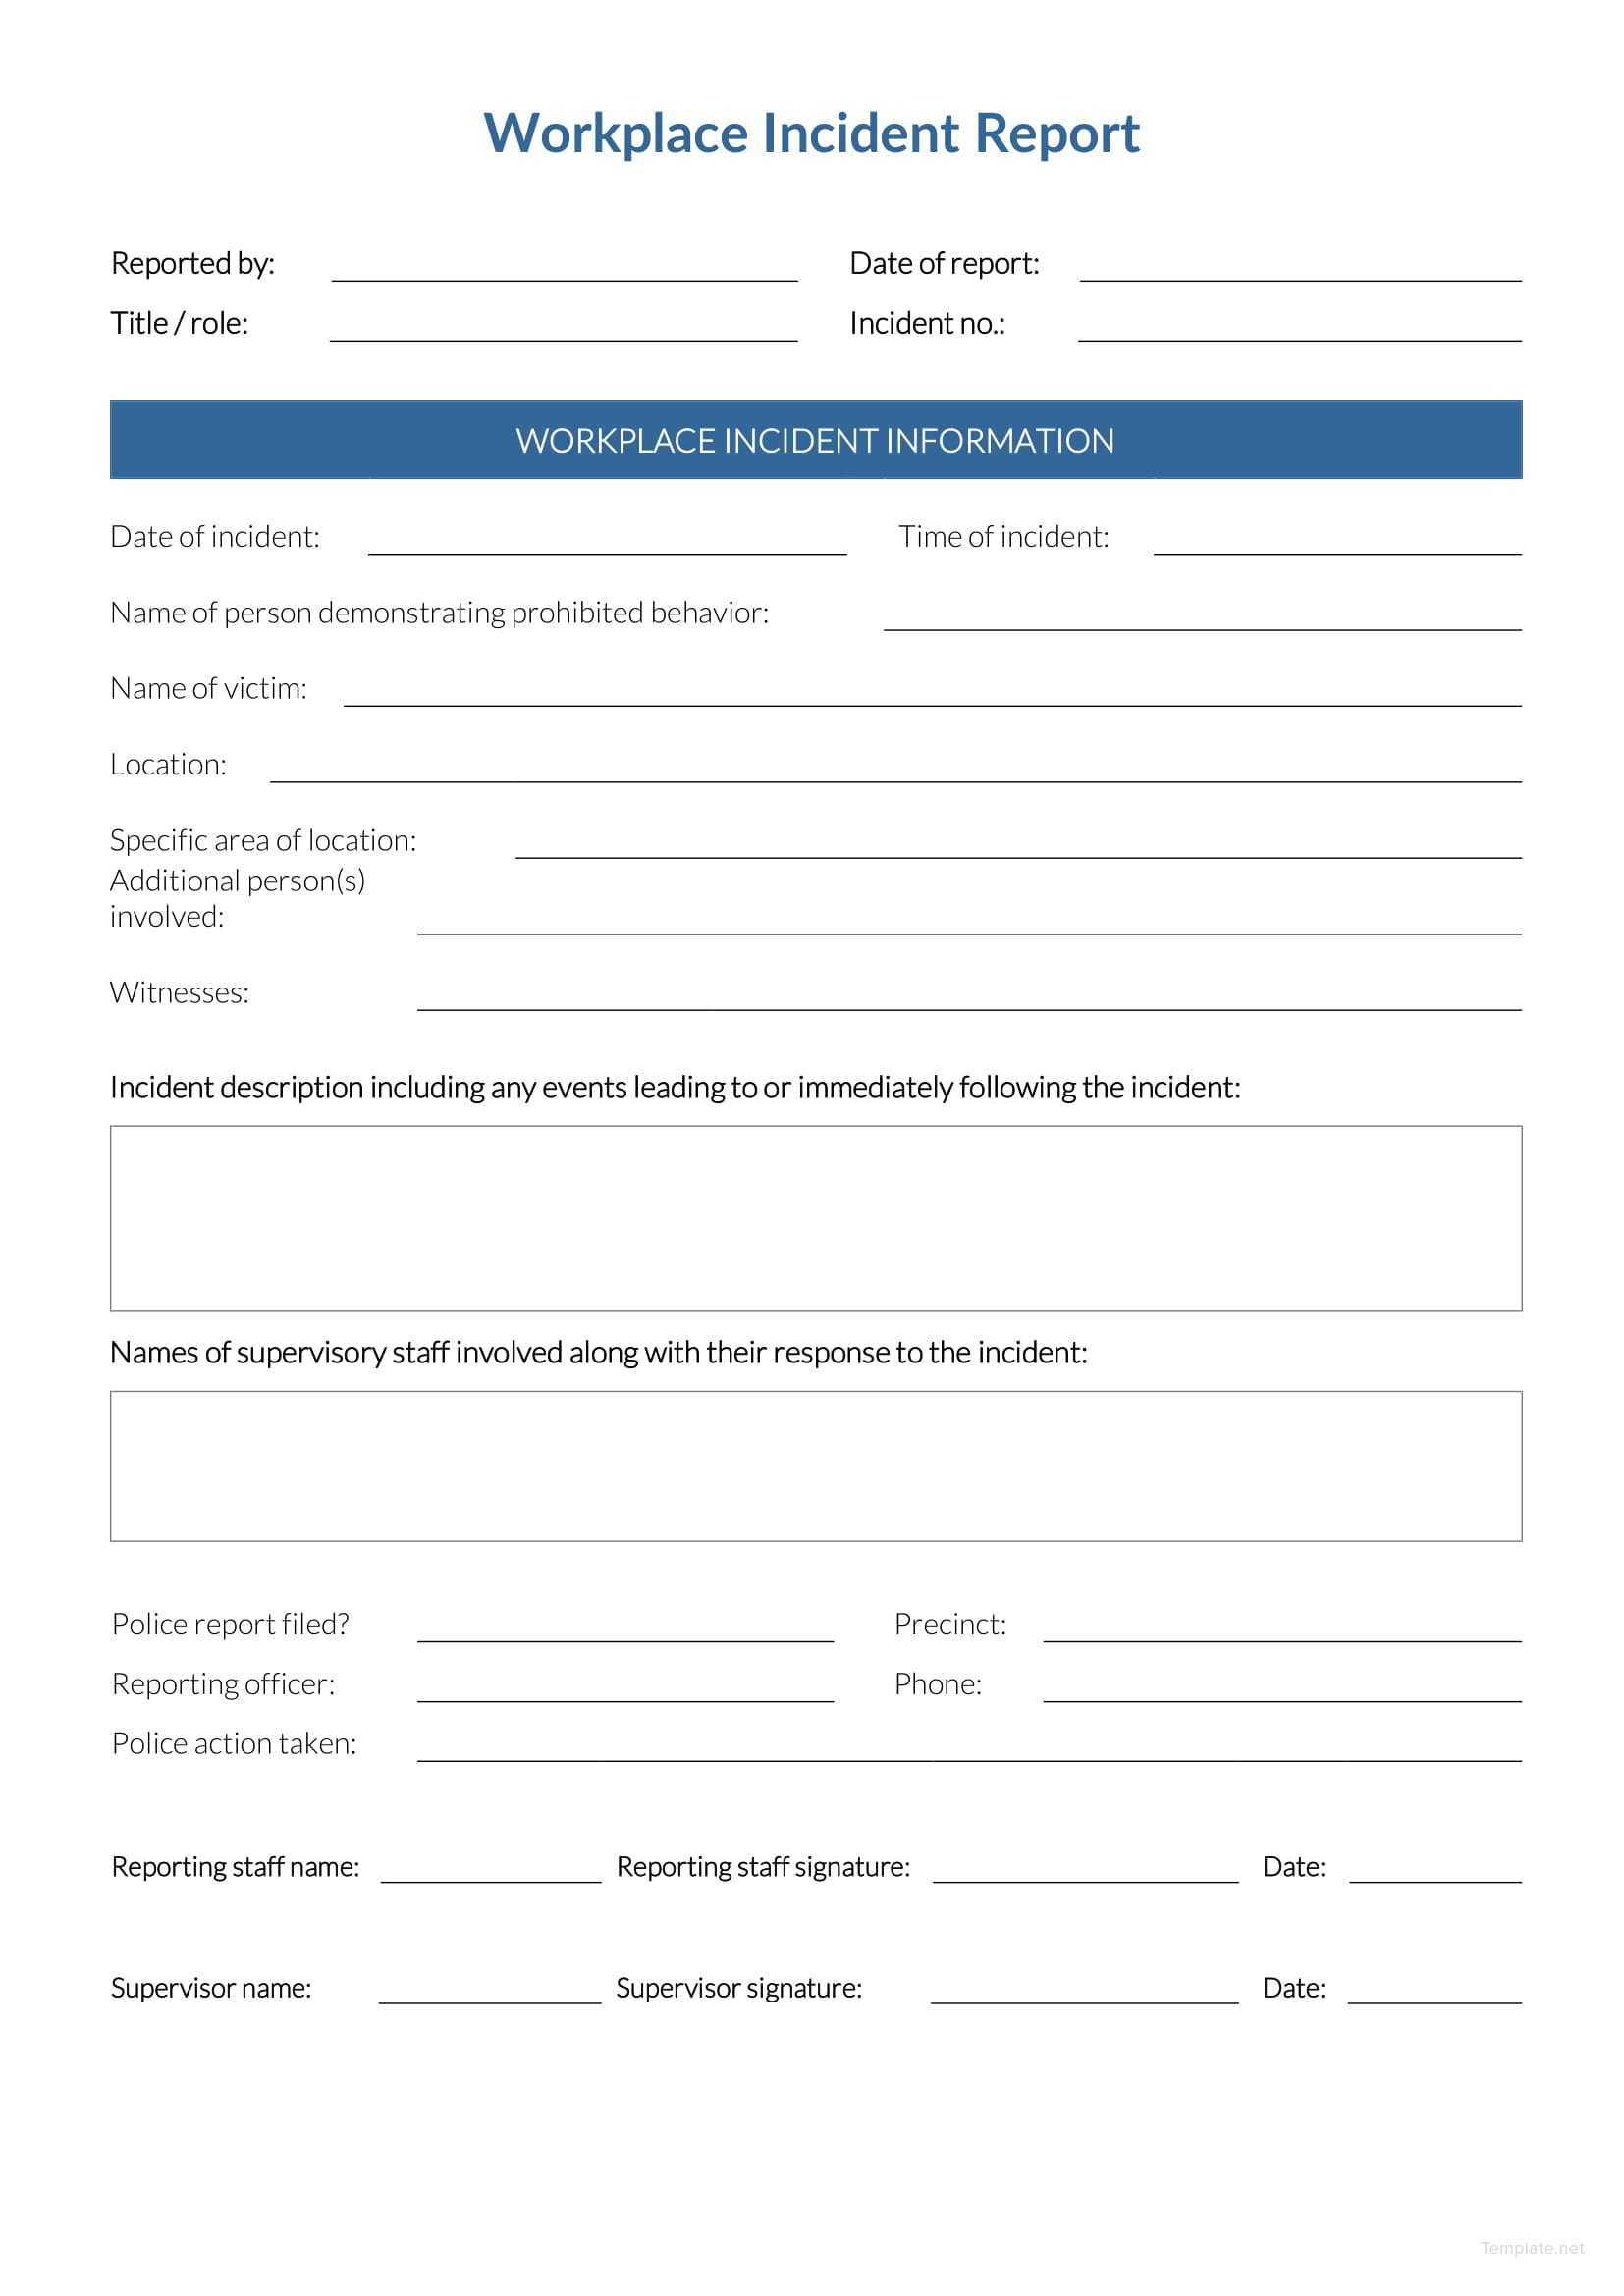 Free Workplace Incident Report | Incident Report, Workplace With Regard To Incident Report Template Itil